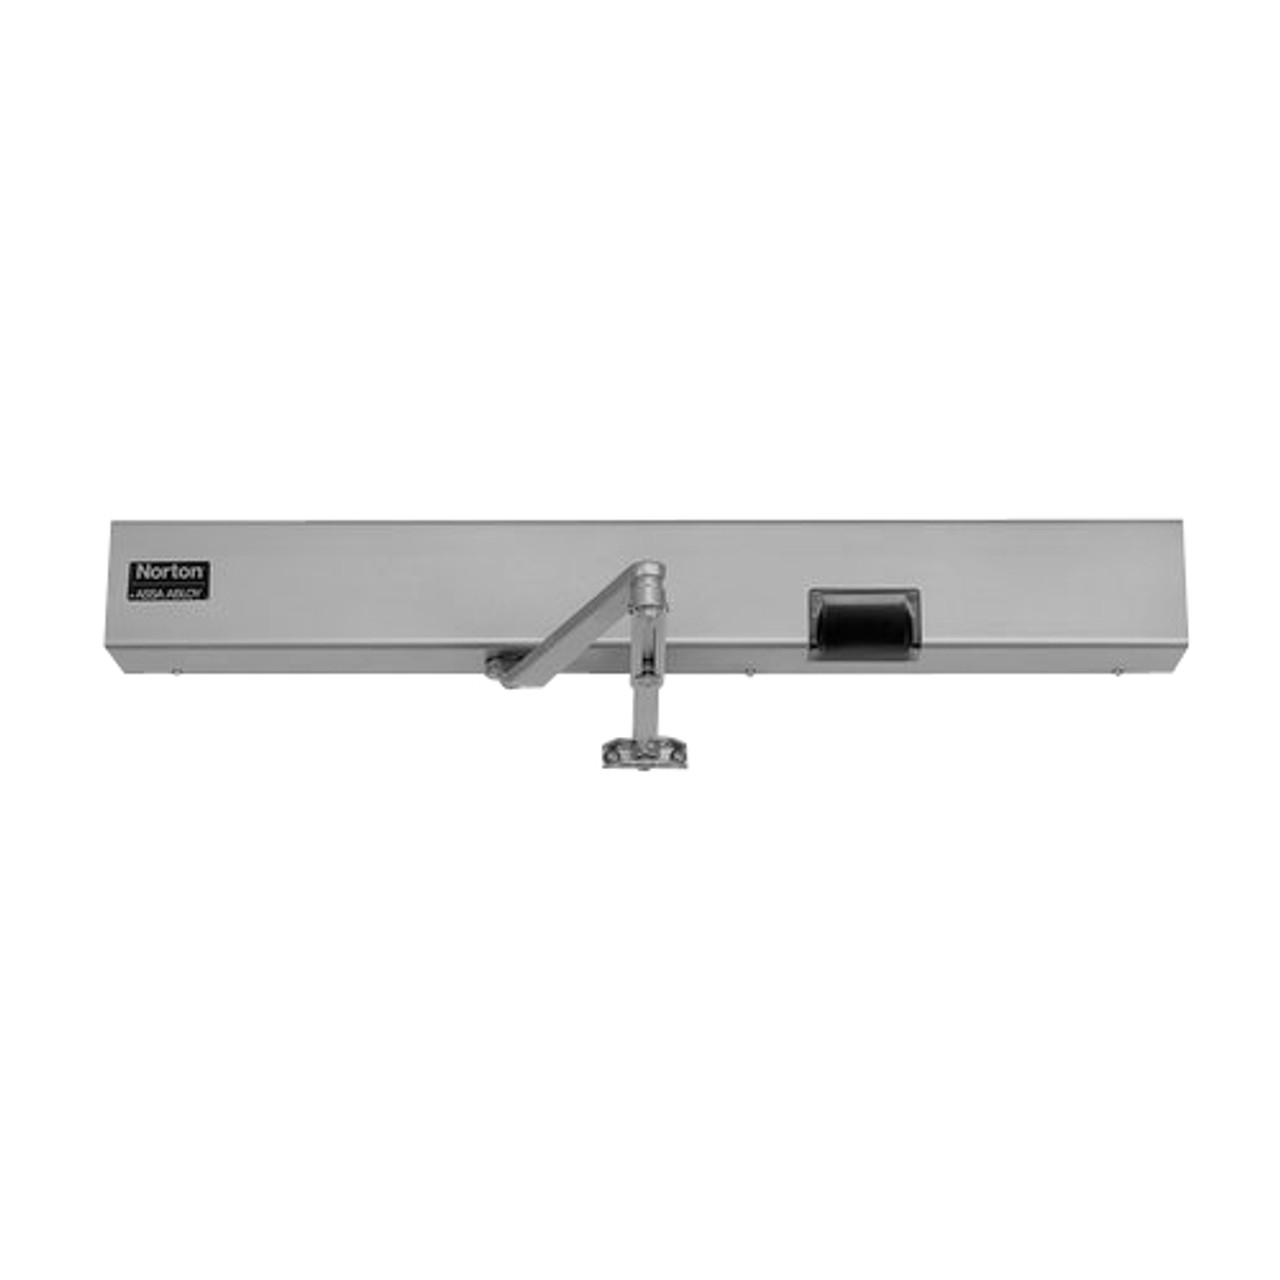 7134SZ-RH-120VAC-689 Norton 7100SZ Series Safe Zone Multi-Point Closer/Holder with Motion Sensor and Push Side Double Lever 13-1/2 inch Main Arm in Aluminum Finish